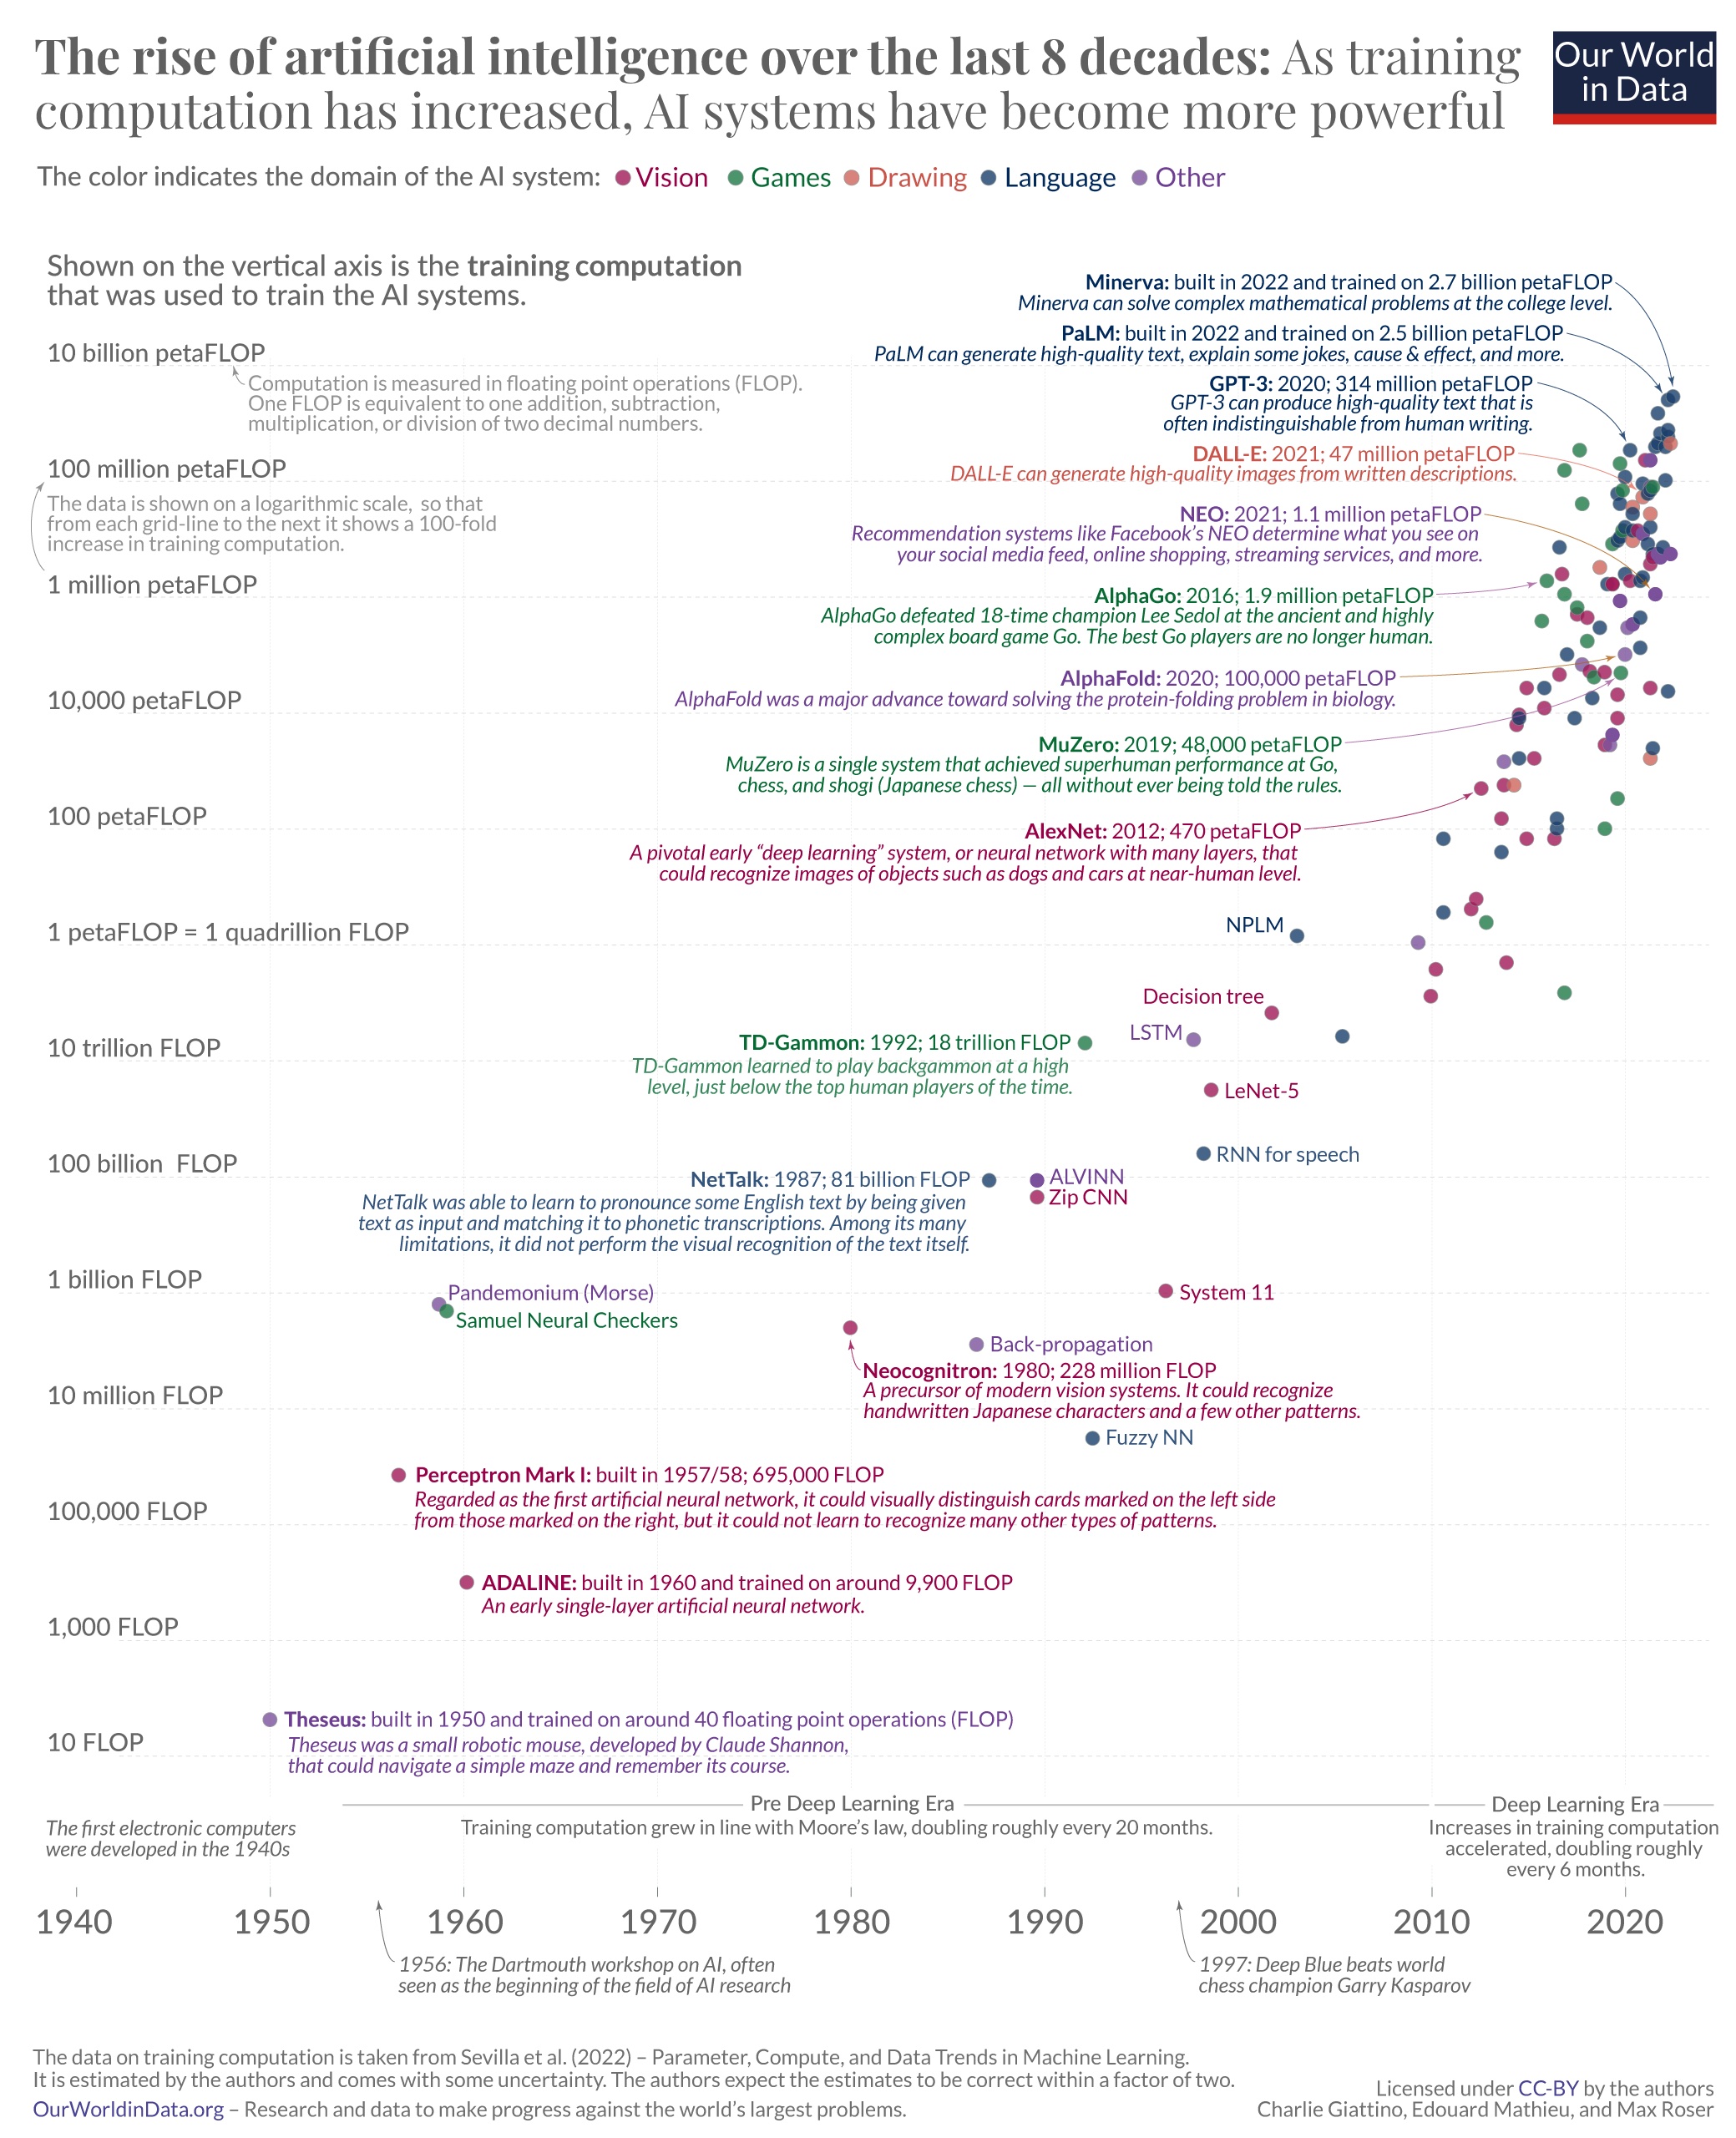 Chart illustrating the history of AI computational power growth from 1950 to 2020, with a steep increase over the last decade.